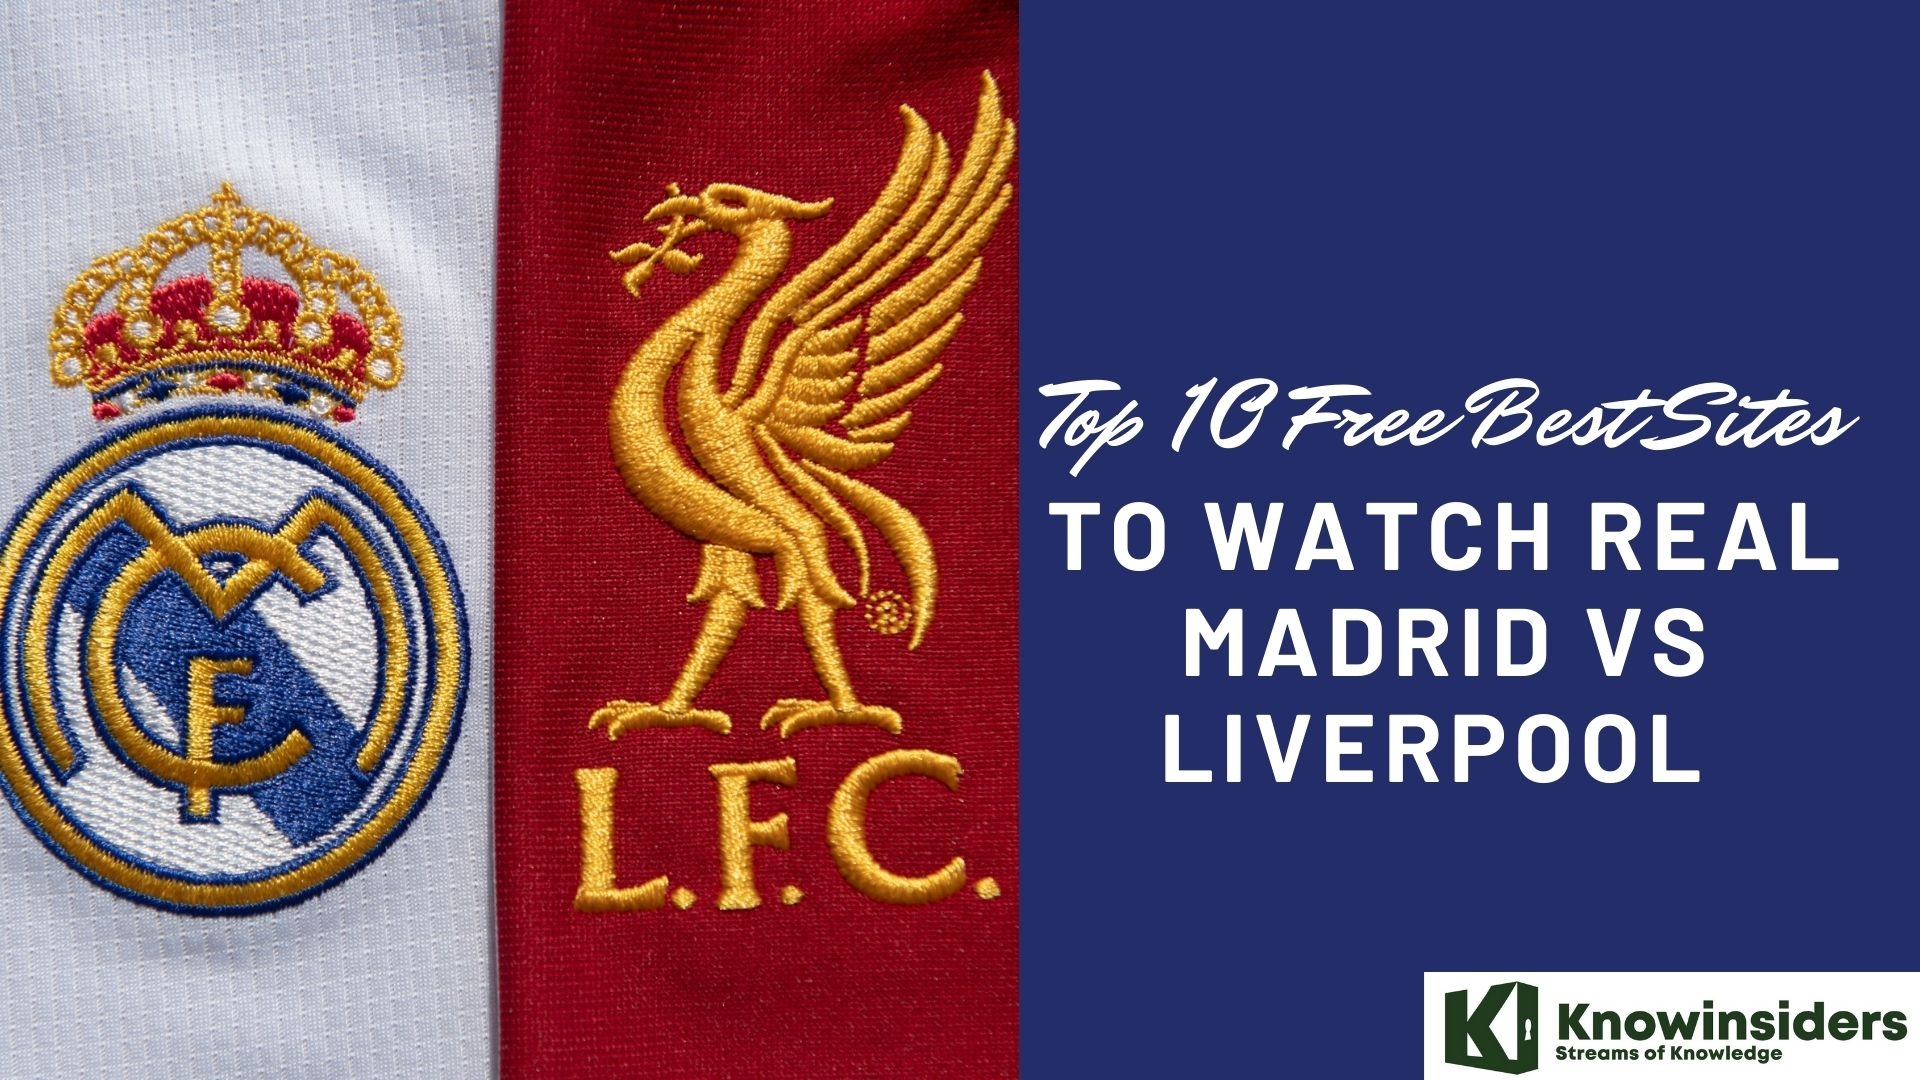 Top 10 Best Free Sites to Watch Real Madrid vs Liverpool – Final Match 